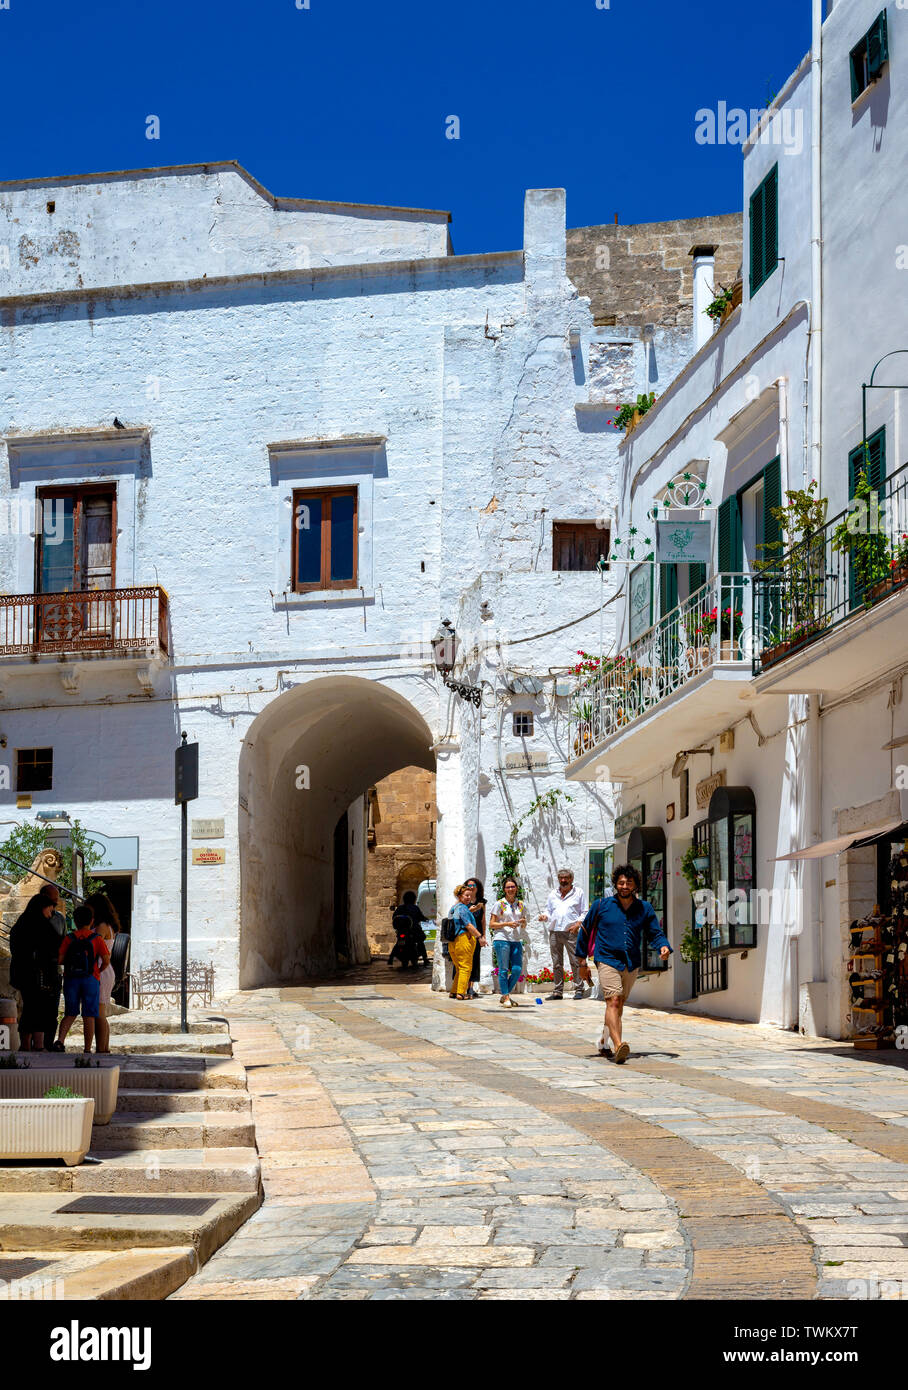 Ostuni, Italy - 24 June 2018: tourists in the characteristic streets of the historic center of Ostuni. Stock Photo